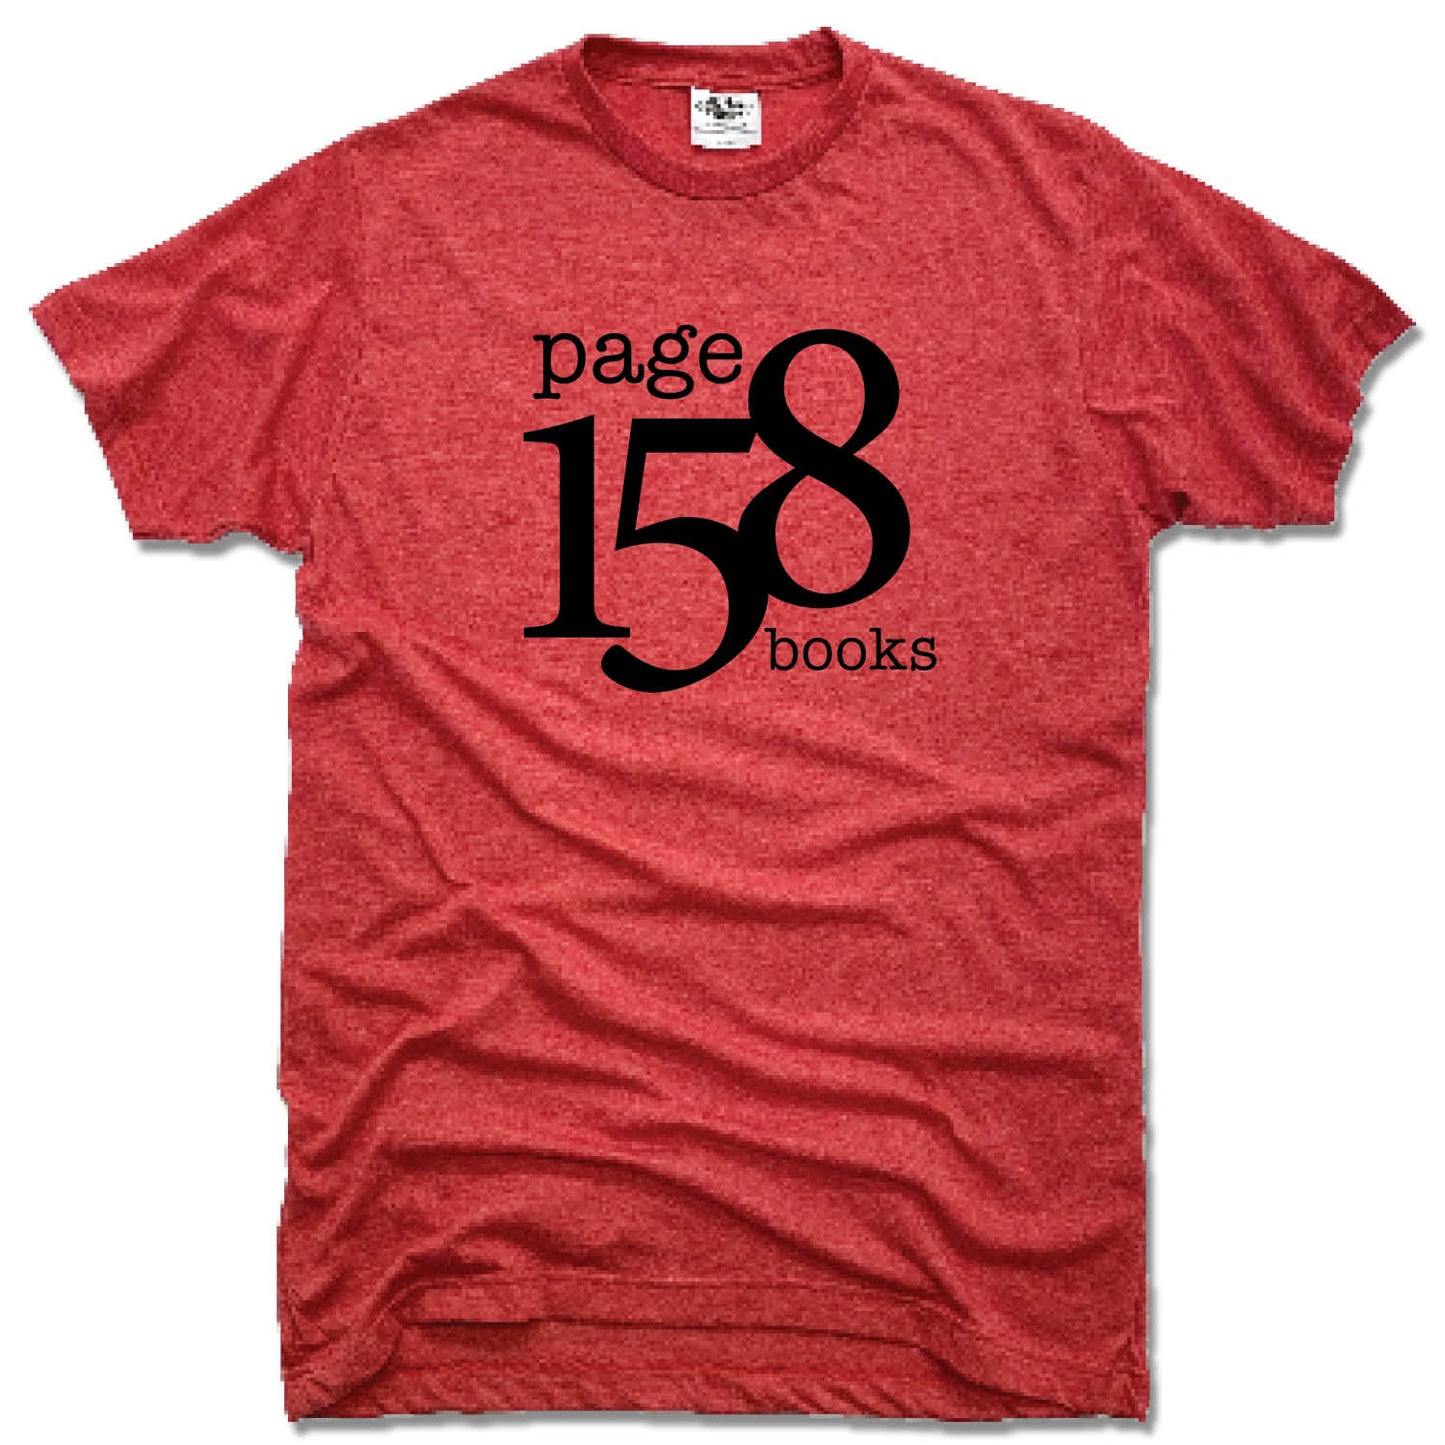 PAGE 158 BOOKS | UNISEX RED TEE | BLACK LOGO